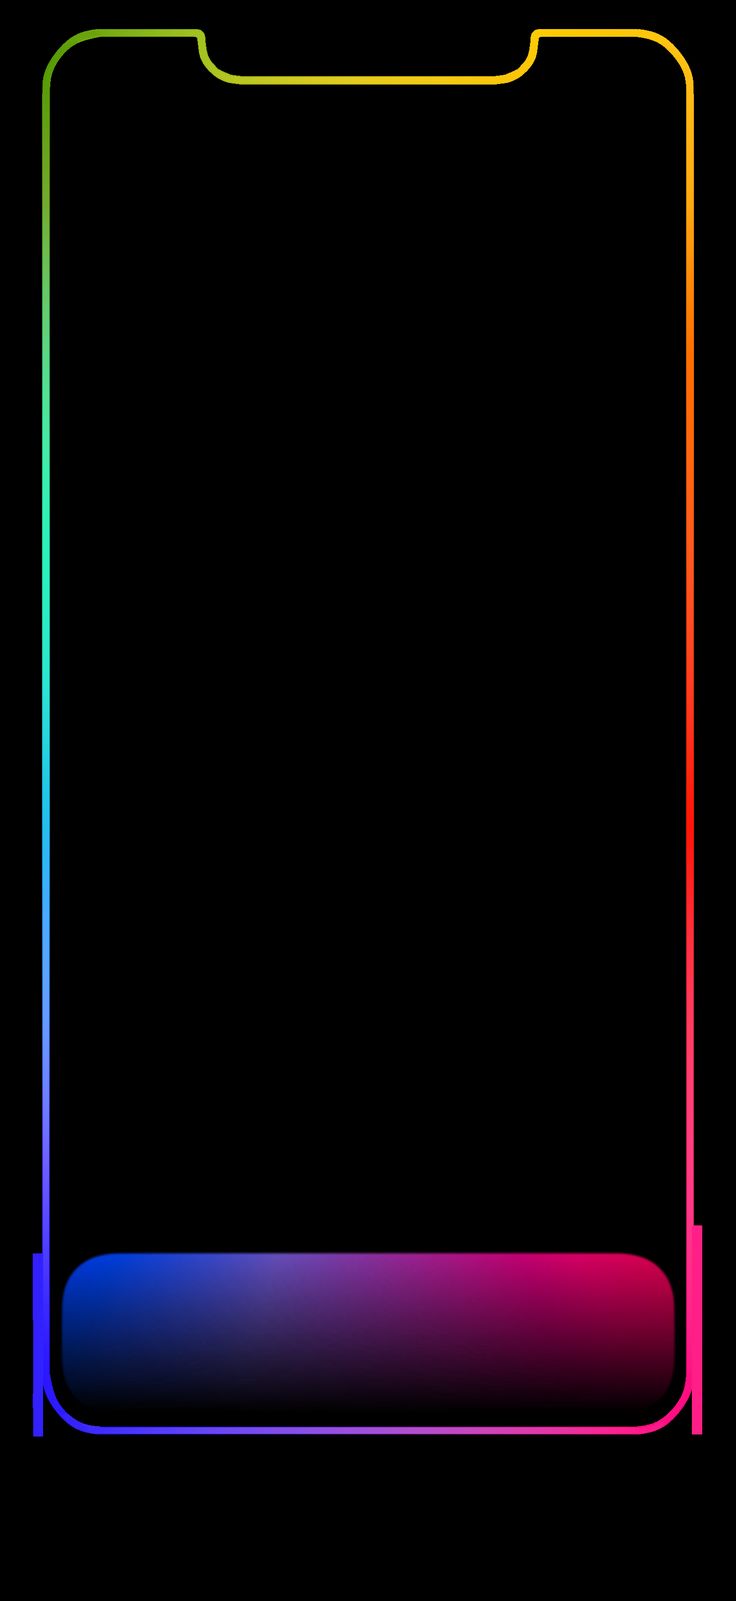 iPhone XS Max Outline wallpaper. Apple wallpaper iphone, Apple wallpaper, Dark wallpaper iphone